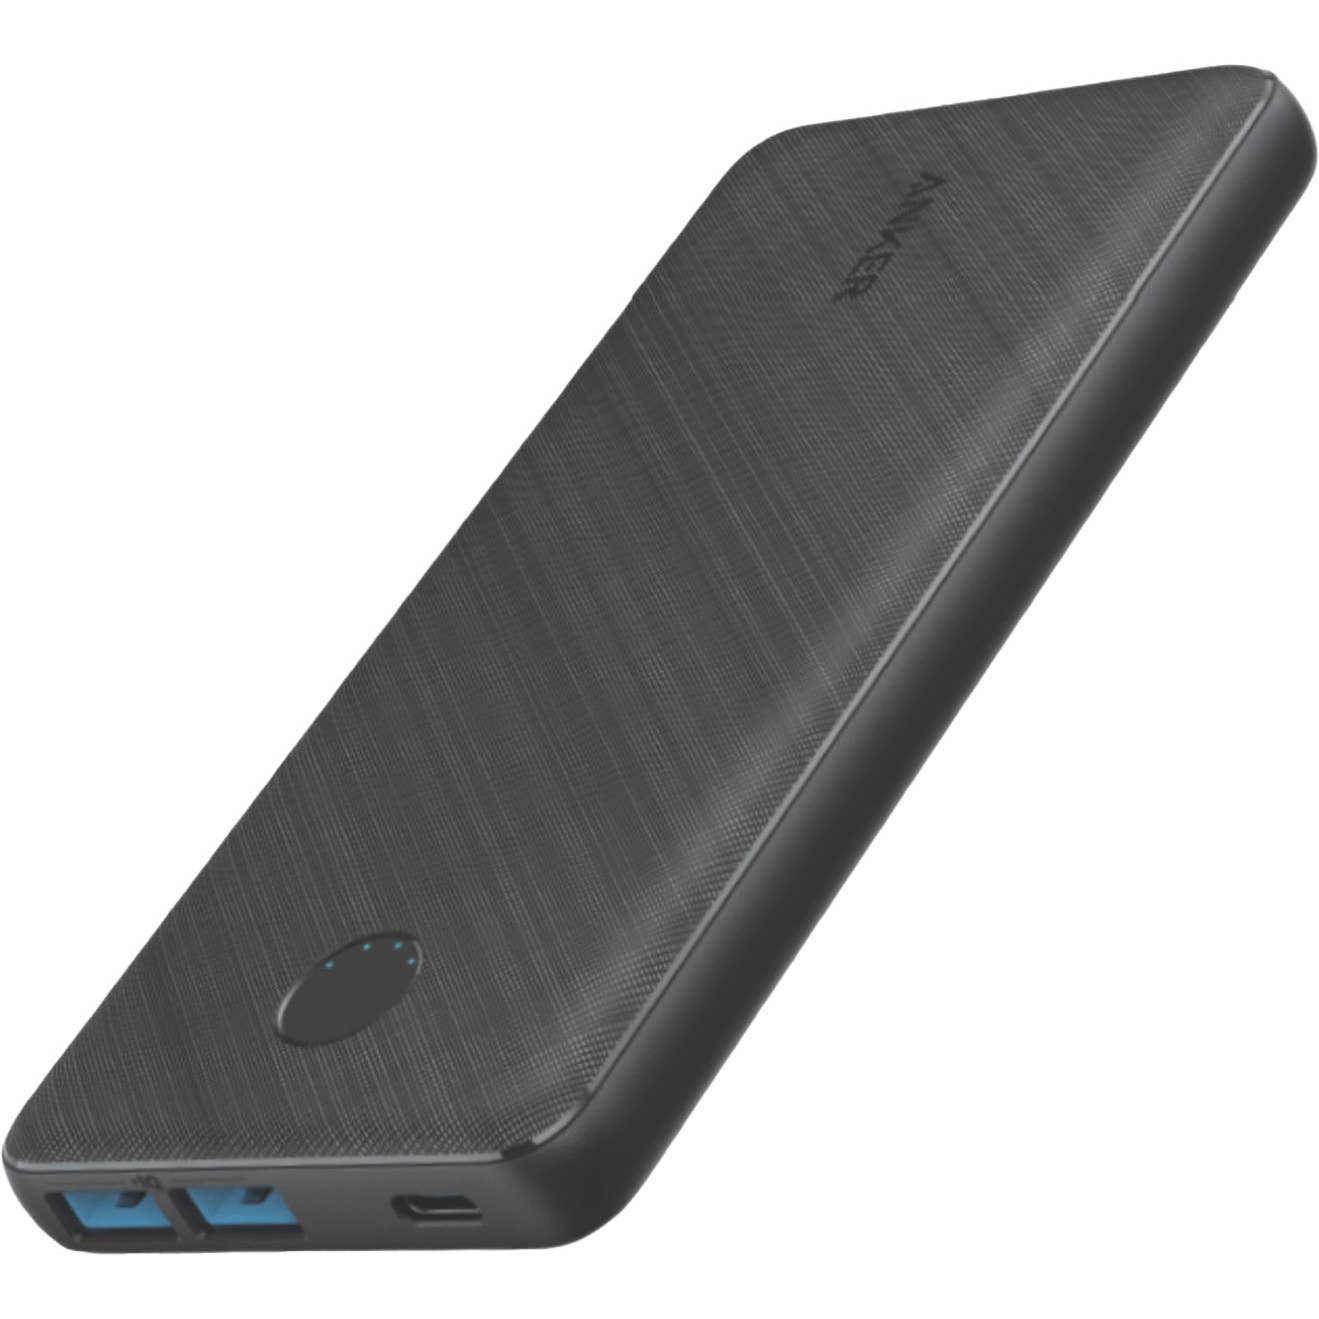 Anker - A1364H11-1 PowerCore III 20K mAh USB-C Portable Battery Charger - Black